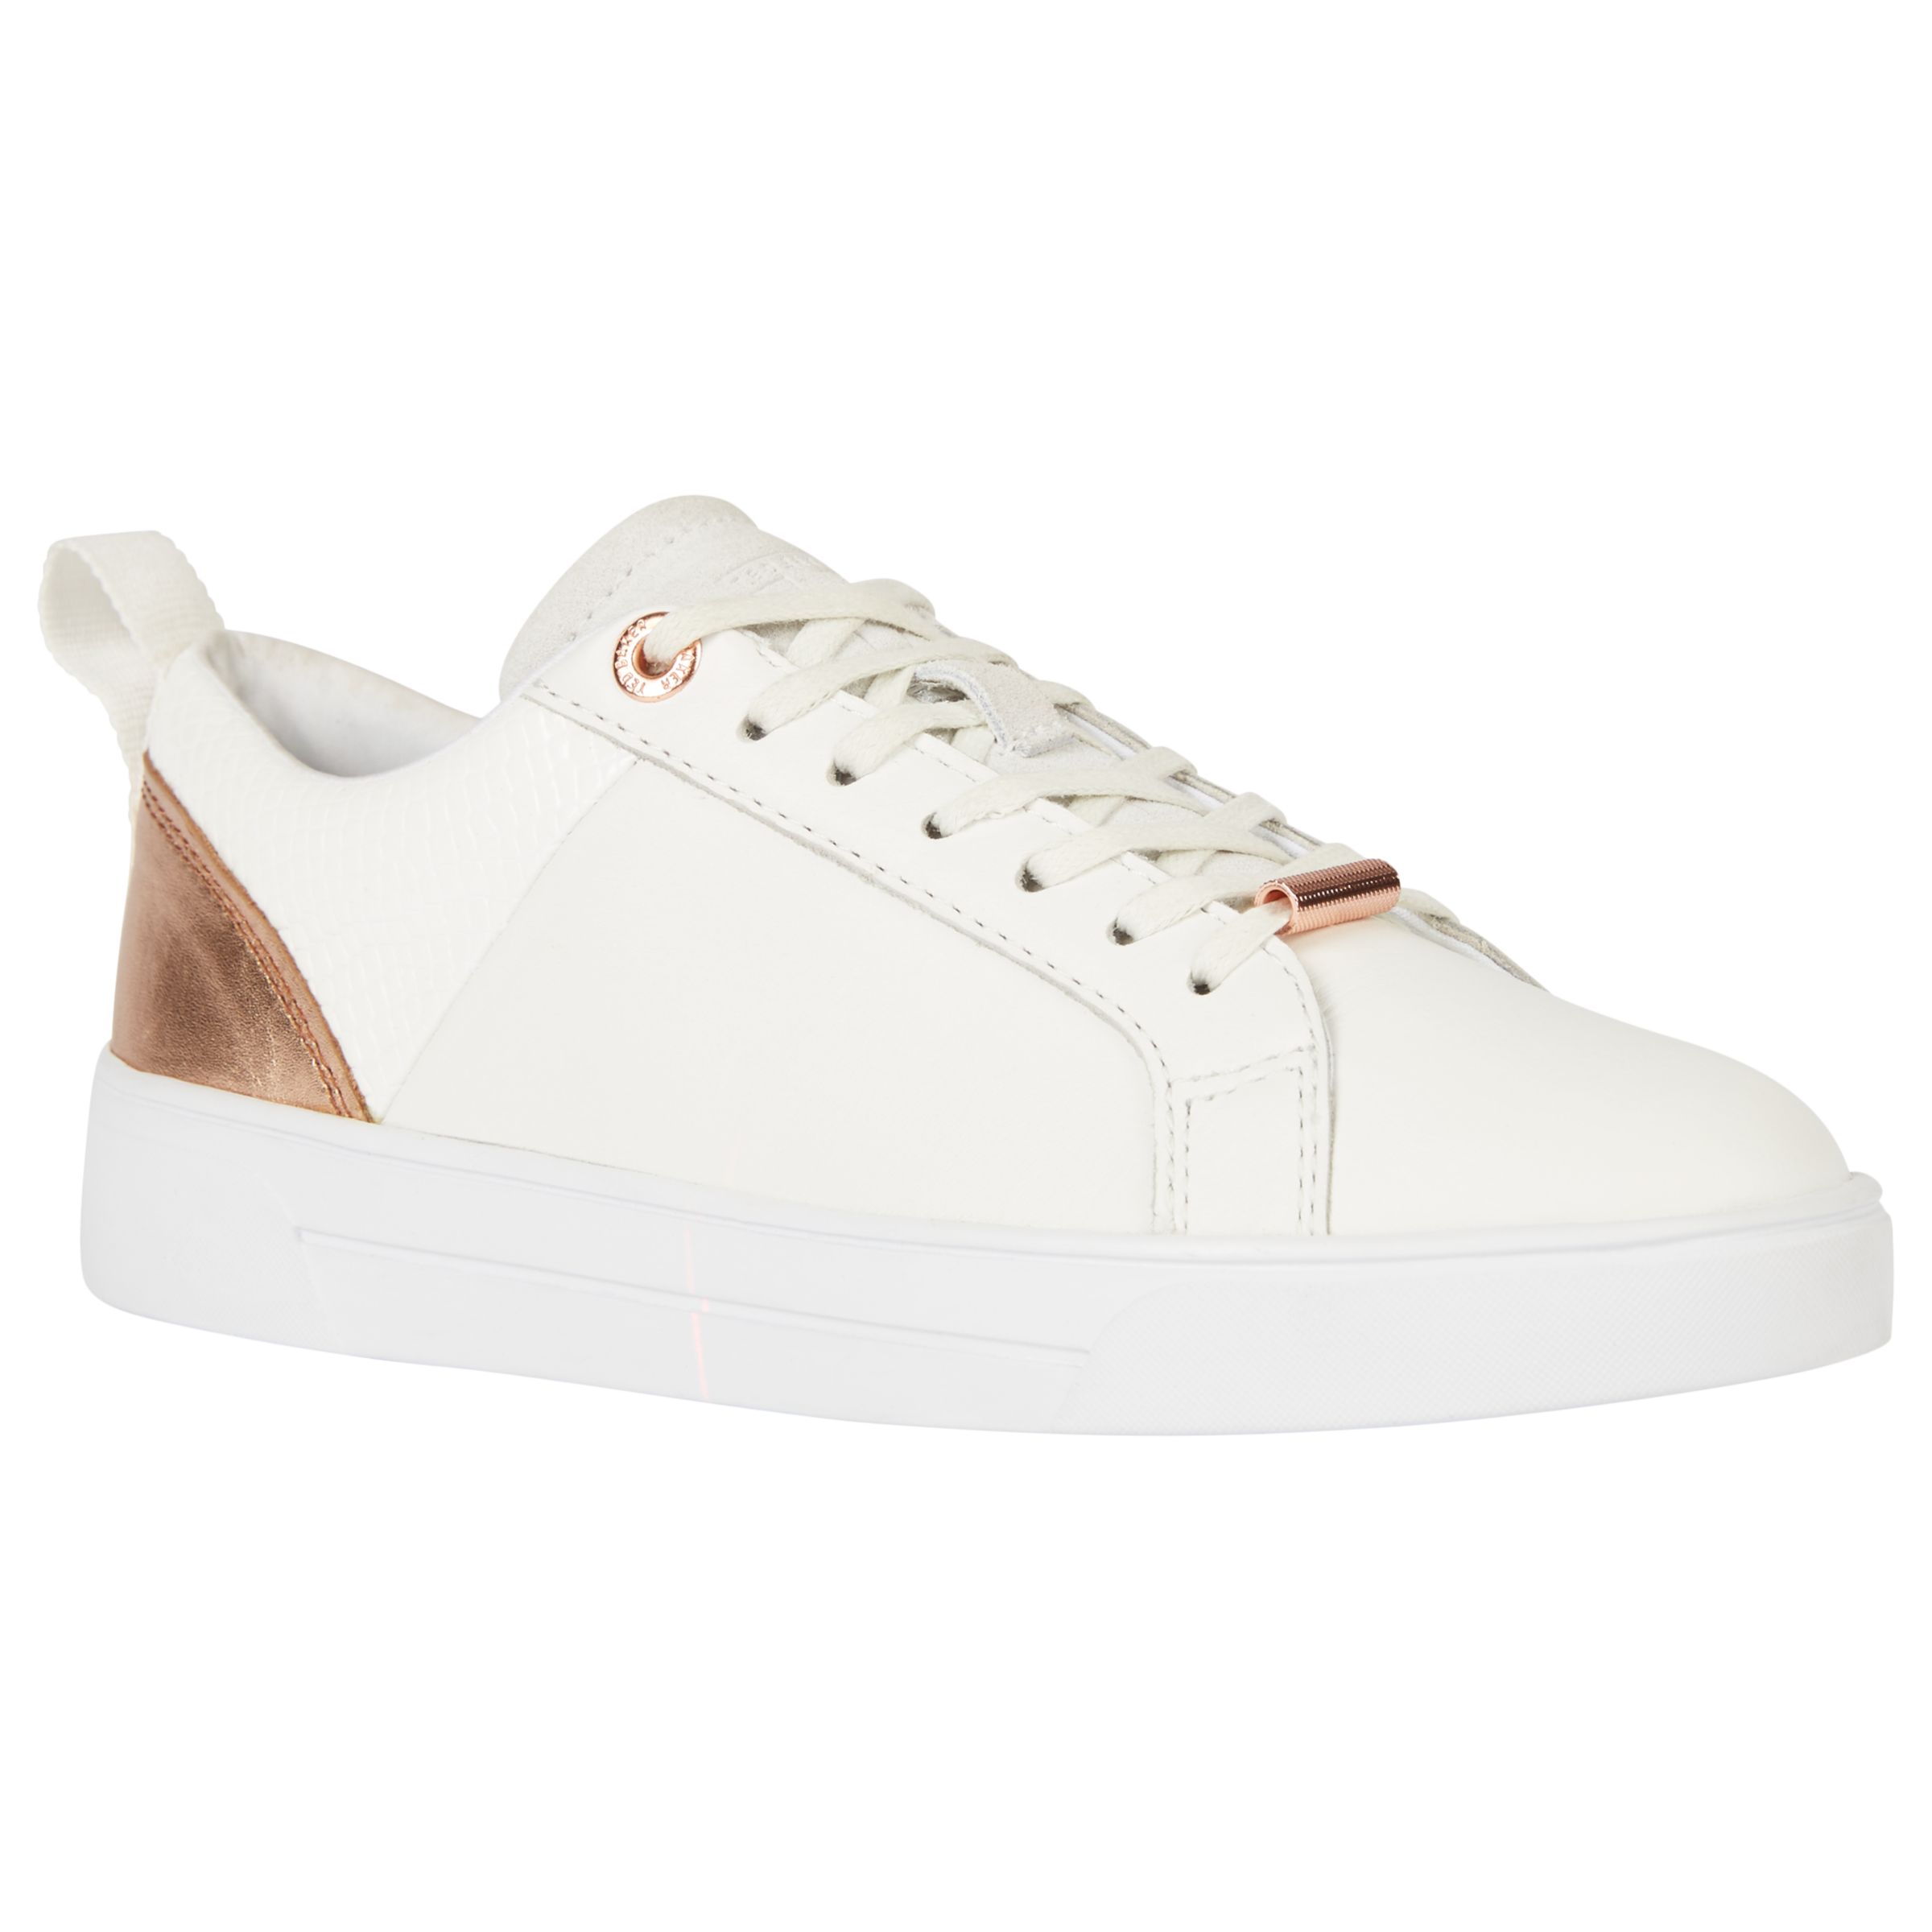 ted baker rose gold trainers